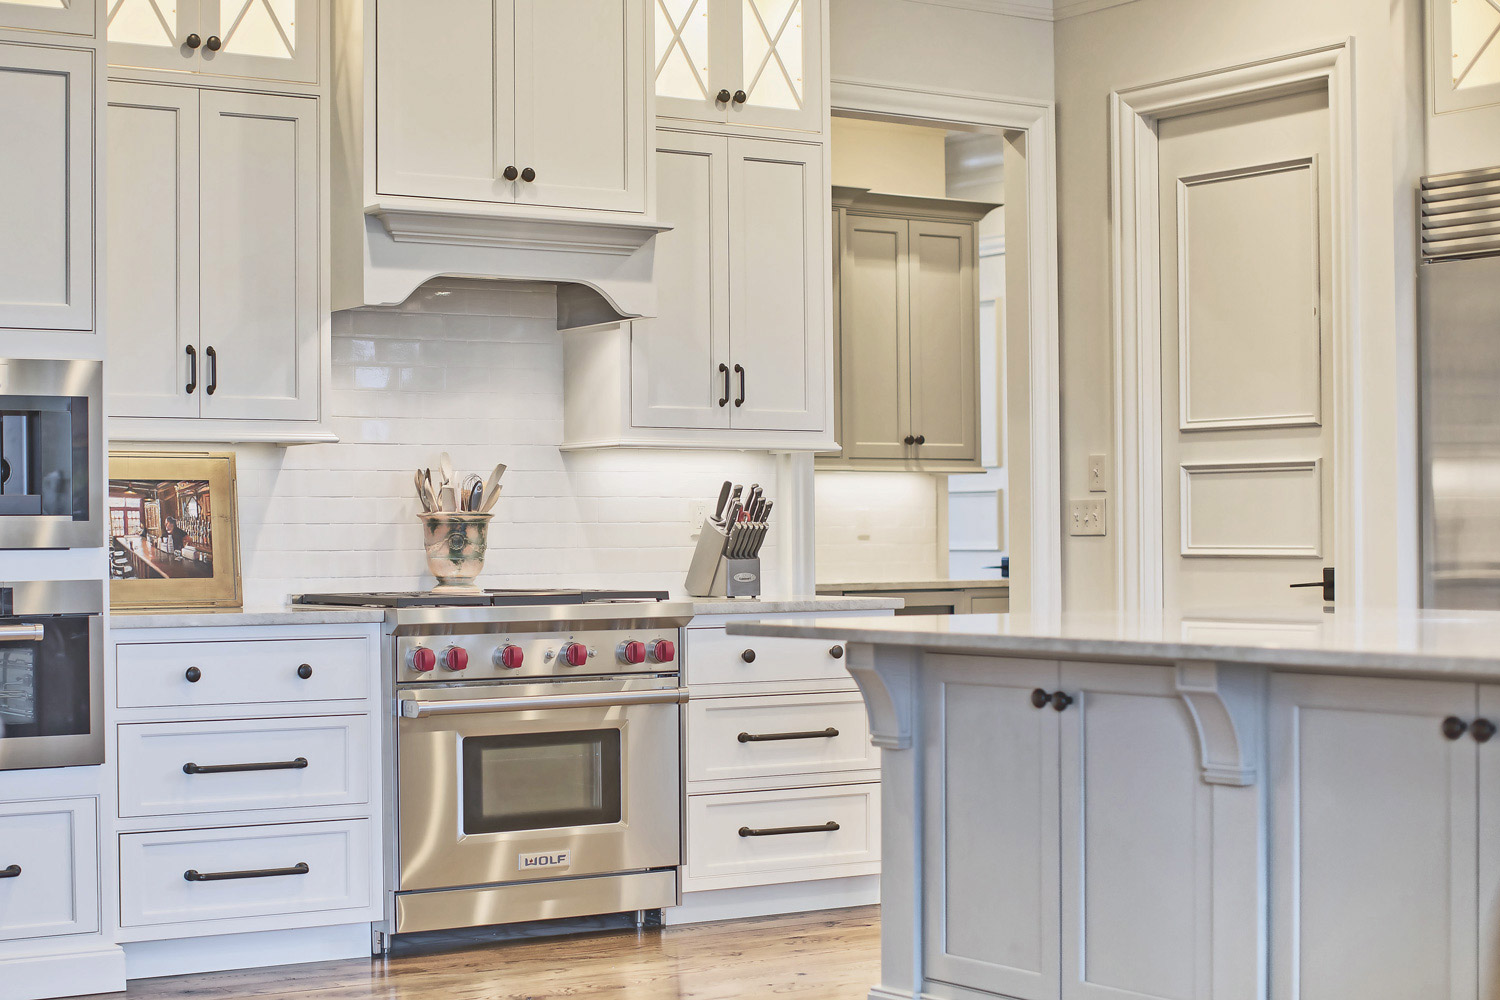 Is A Cooktop And Wall Oven Or Range Best For Your Kitchen Design Toulmin Cabinetry Design